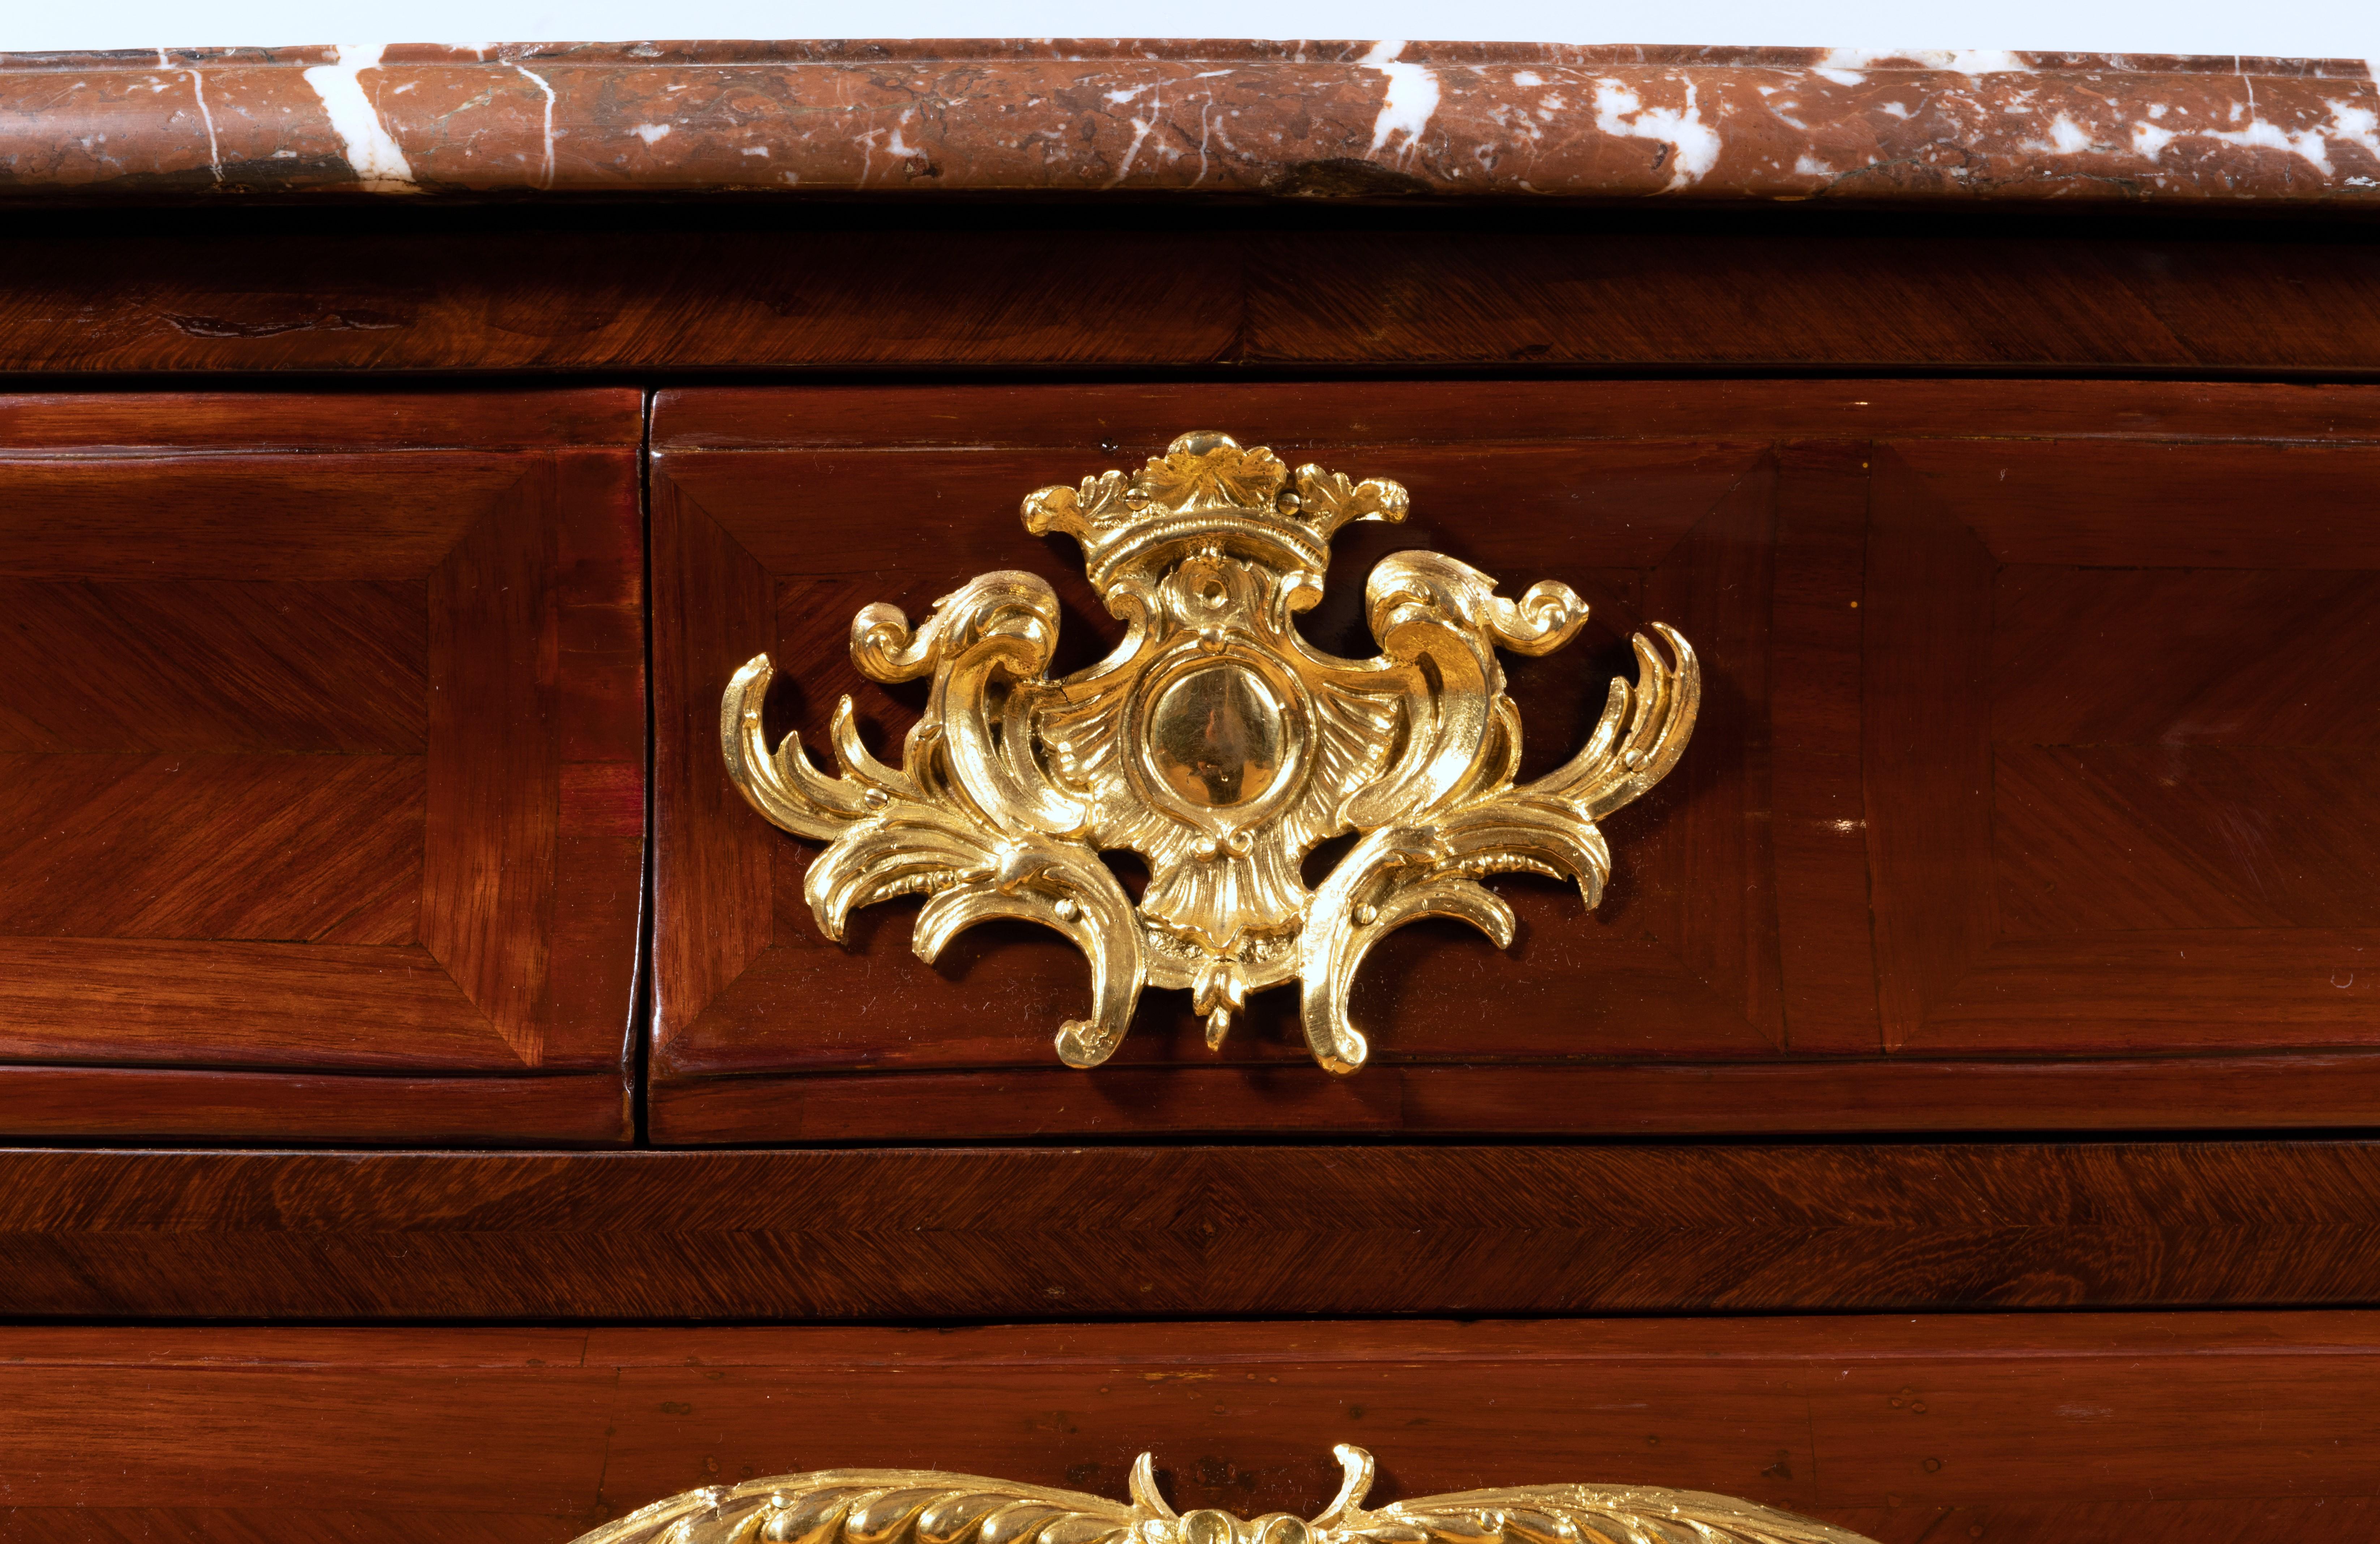 French 18th Century Regence Ormolu-Mounted Commode by Etienne Doirat For Sale 4